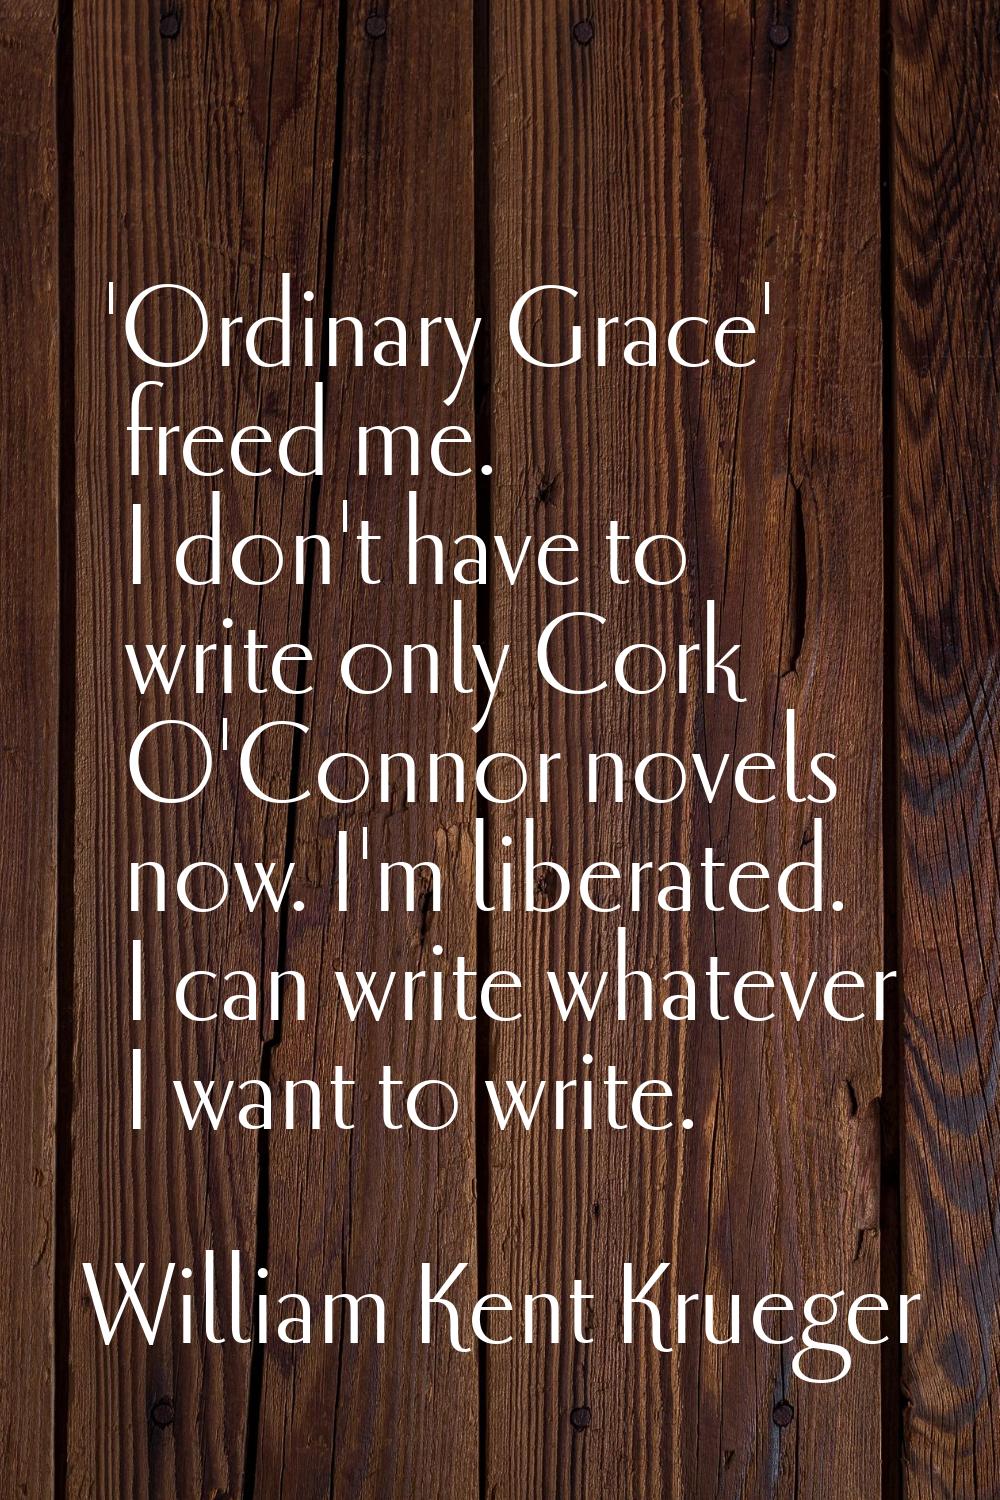 'Ordinary Grace' freed me. I don't have to write only Cork O'Connor novels now. I'm liberated. I ca